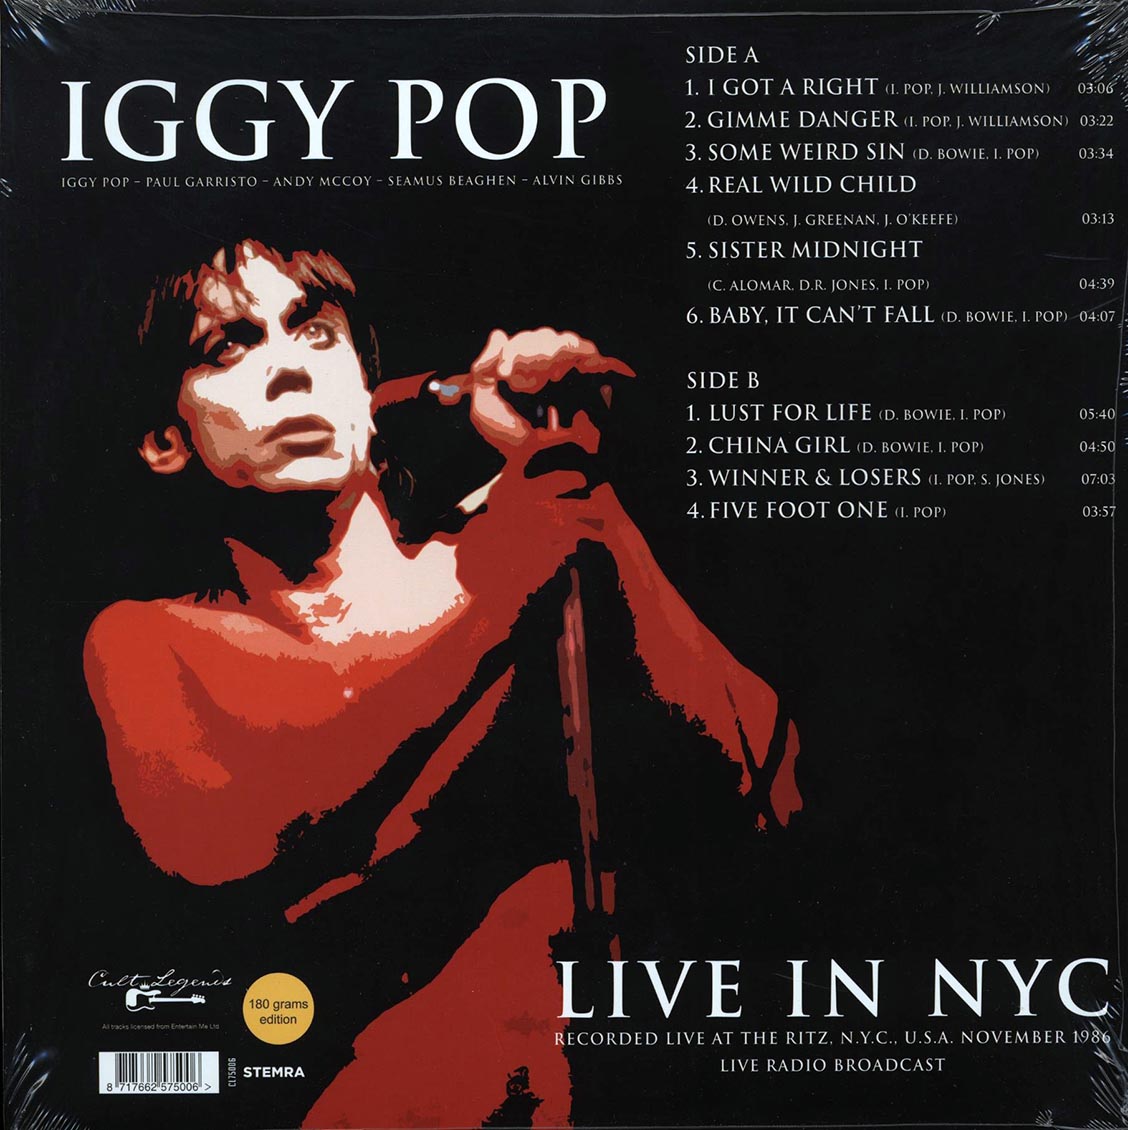 Iggy Pop - Live In NYC: Recorded Live At The Ritz, NYC, USA November 1986 Live Radio Broadcast - Vinyl LP, LP